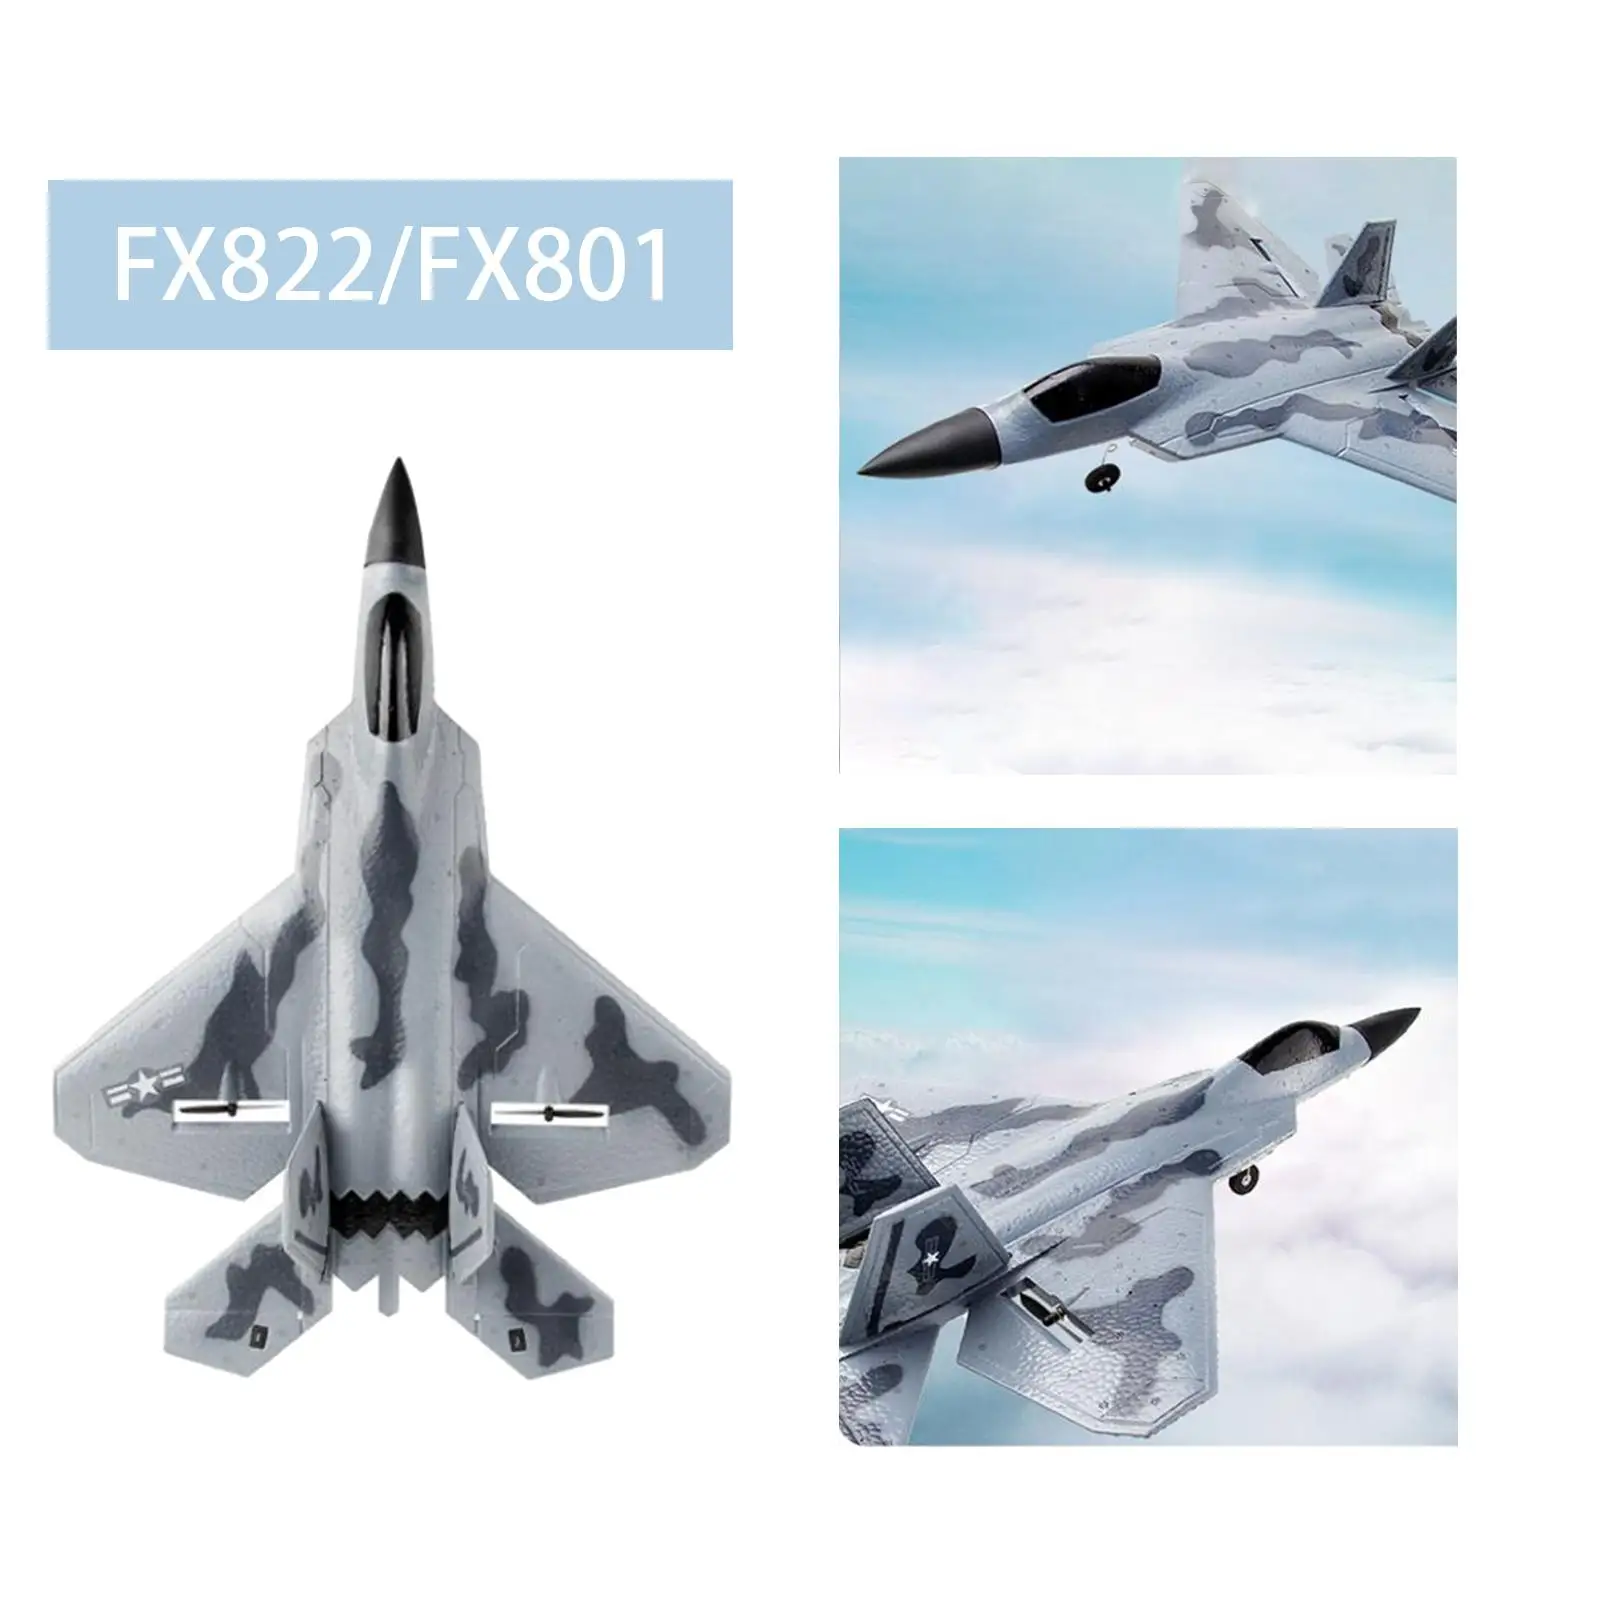 2.4G 2 Channel Fighter EVA Plane Light Sound Plane Control RC Plane for Children Boys Girls Ages 8 10 12 Kids Beginners Gifts